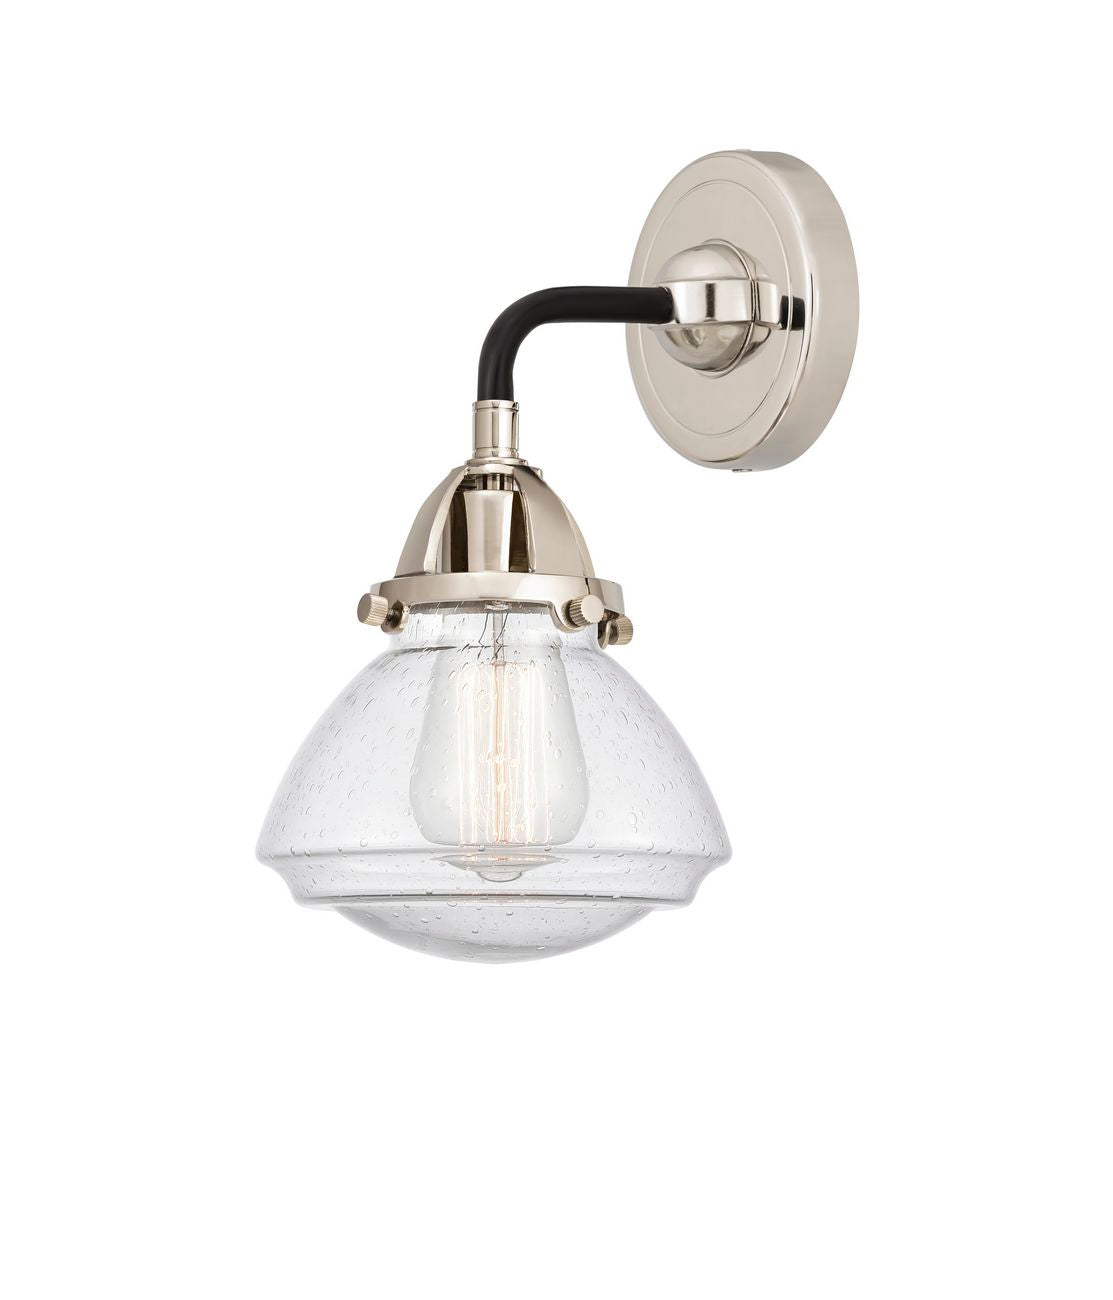 288-1W-BPN-G324 1-Light 6.75" Black Polished Nickel Sconce - Seedy Olean Glass - LED Bulb - Dimmensions: 6.75 x 6.875 x 9.375 - Glass Up or Down: Yes